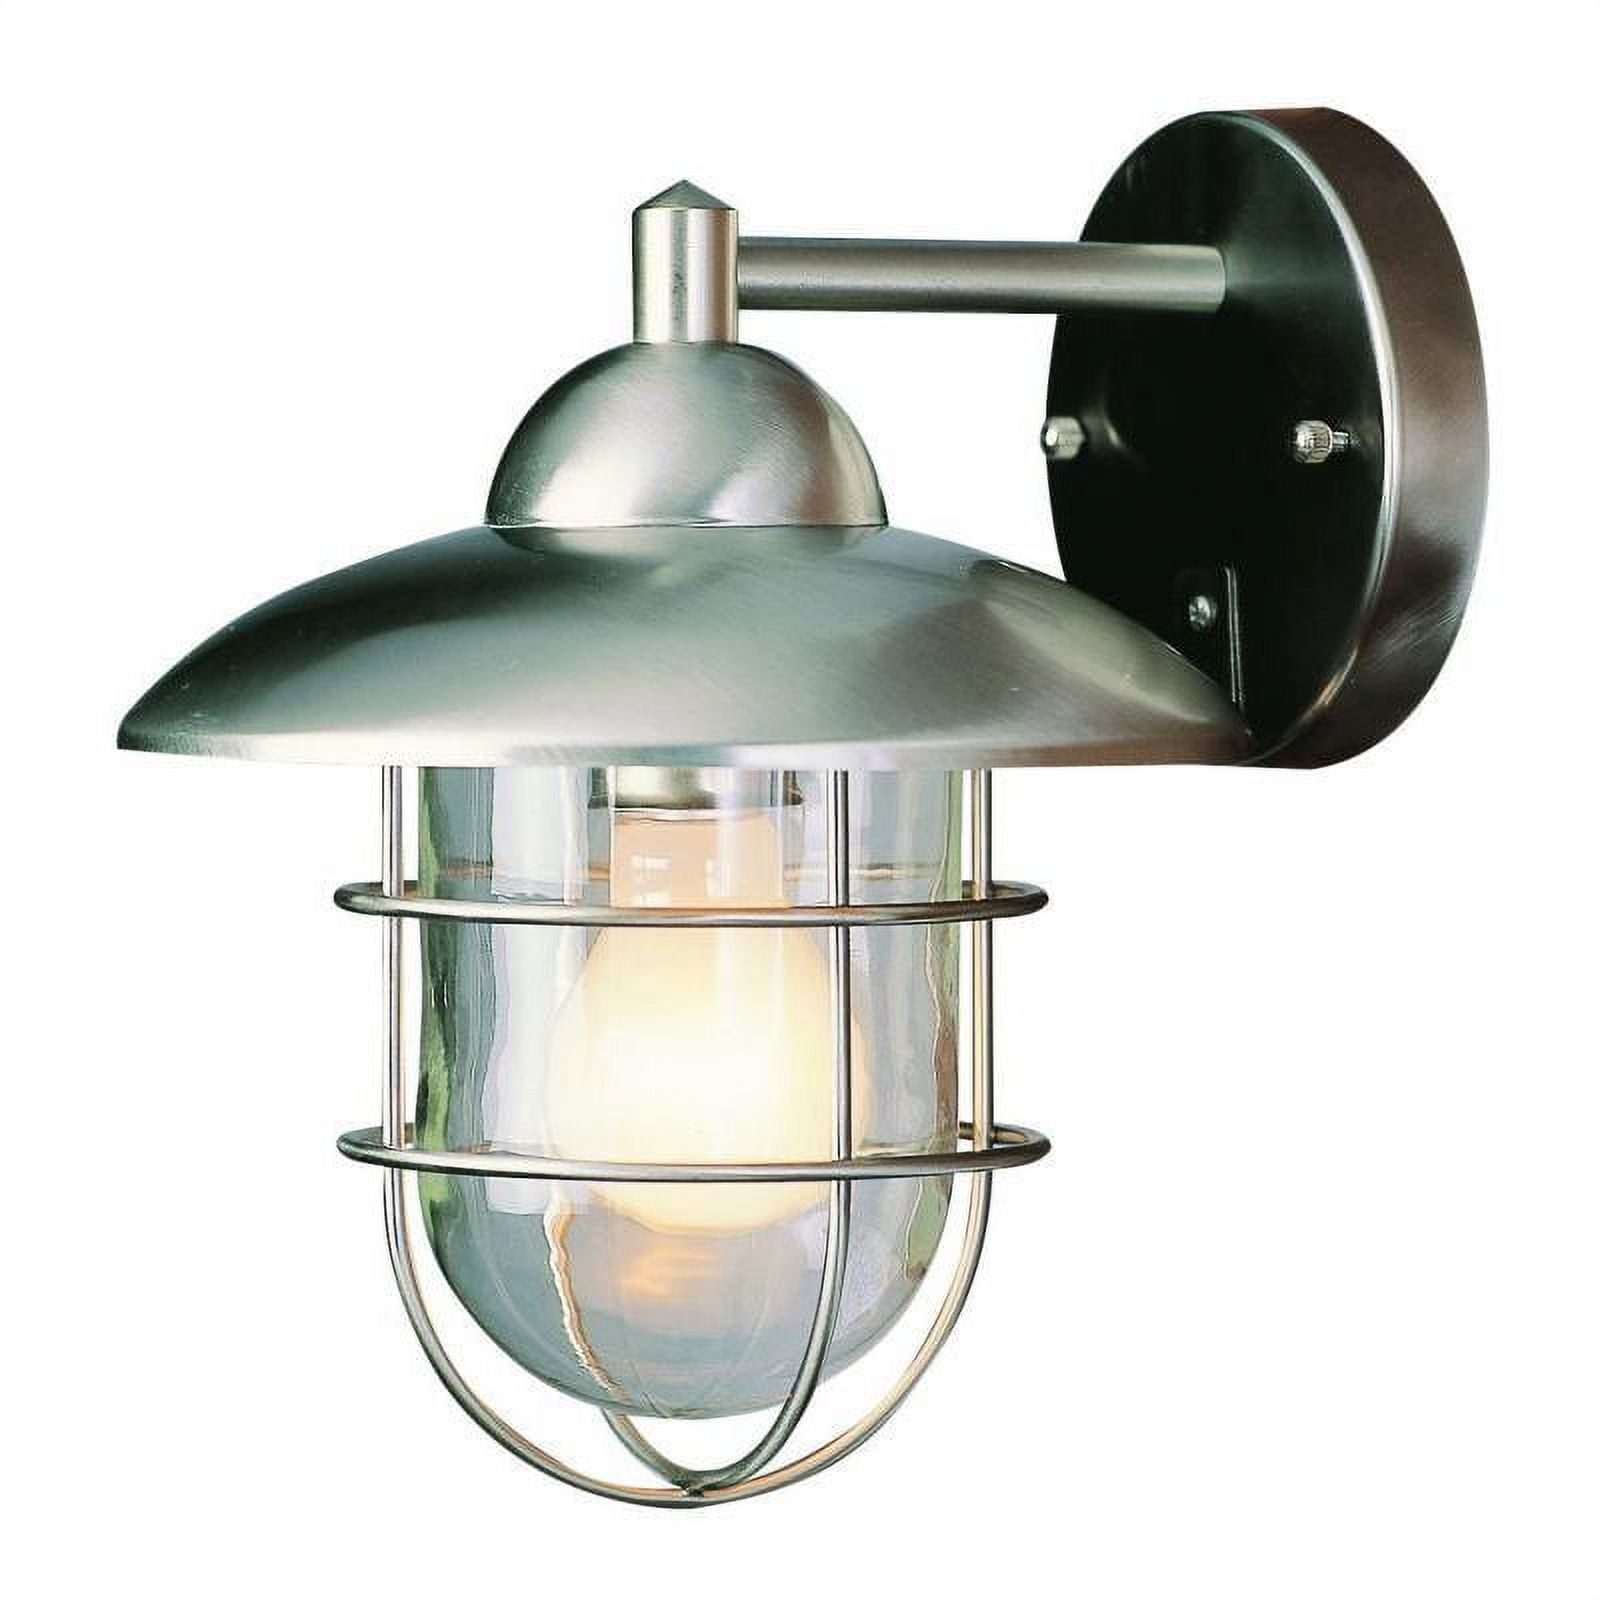 Bel Air Lighting Gull Silver Switch Incandescent Wall Lantern - image 2 of 2